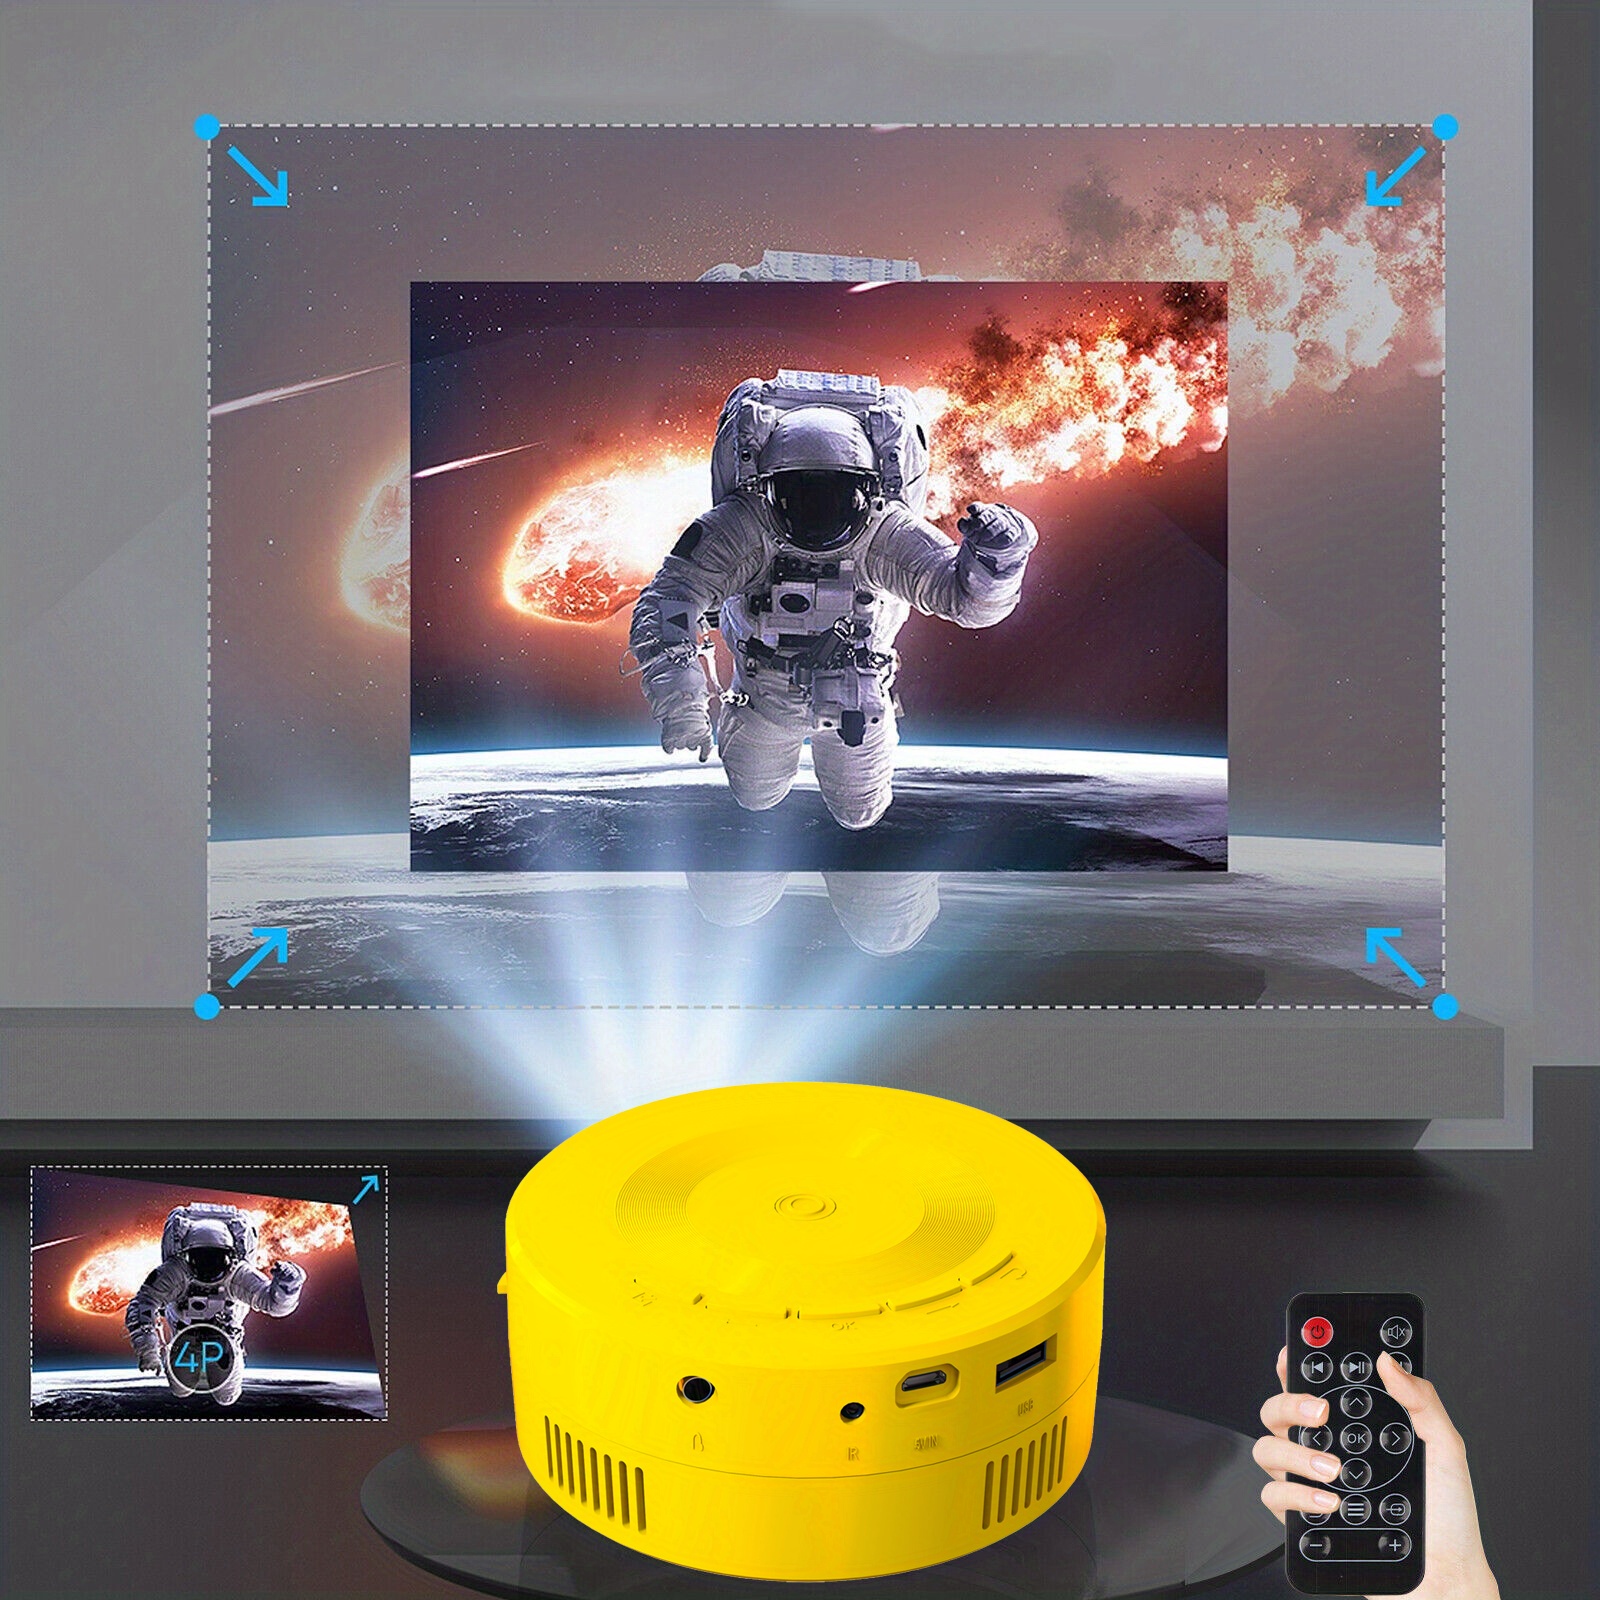 mini portable projector e60 30000 hour kids gifts for kids movie projector supported hd 1080p small portable movie projector for outdoor projector use in camping for ios android av 5v in usb details 6